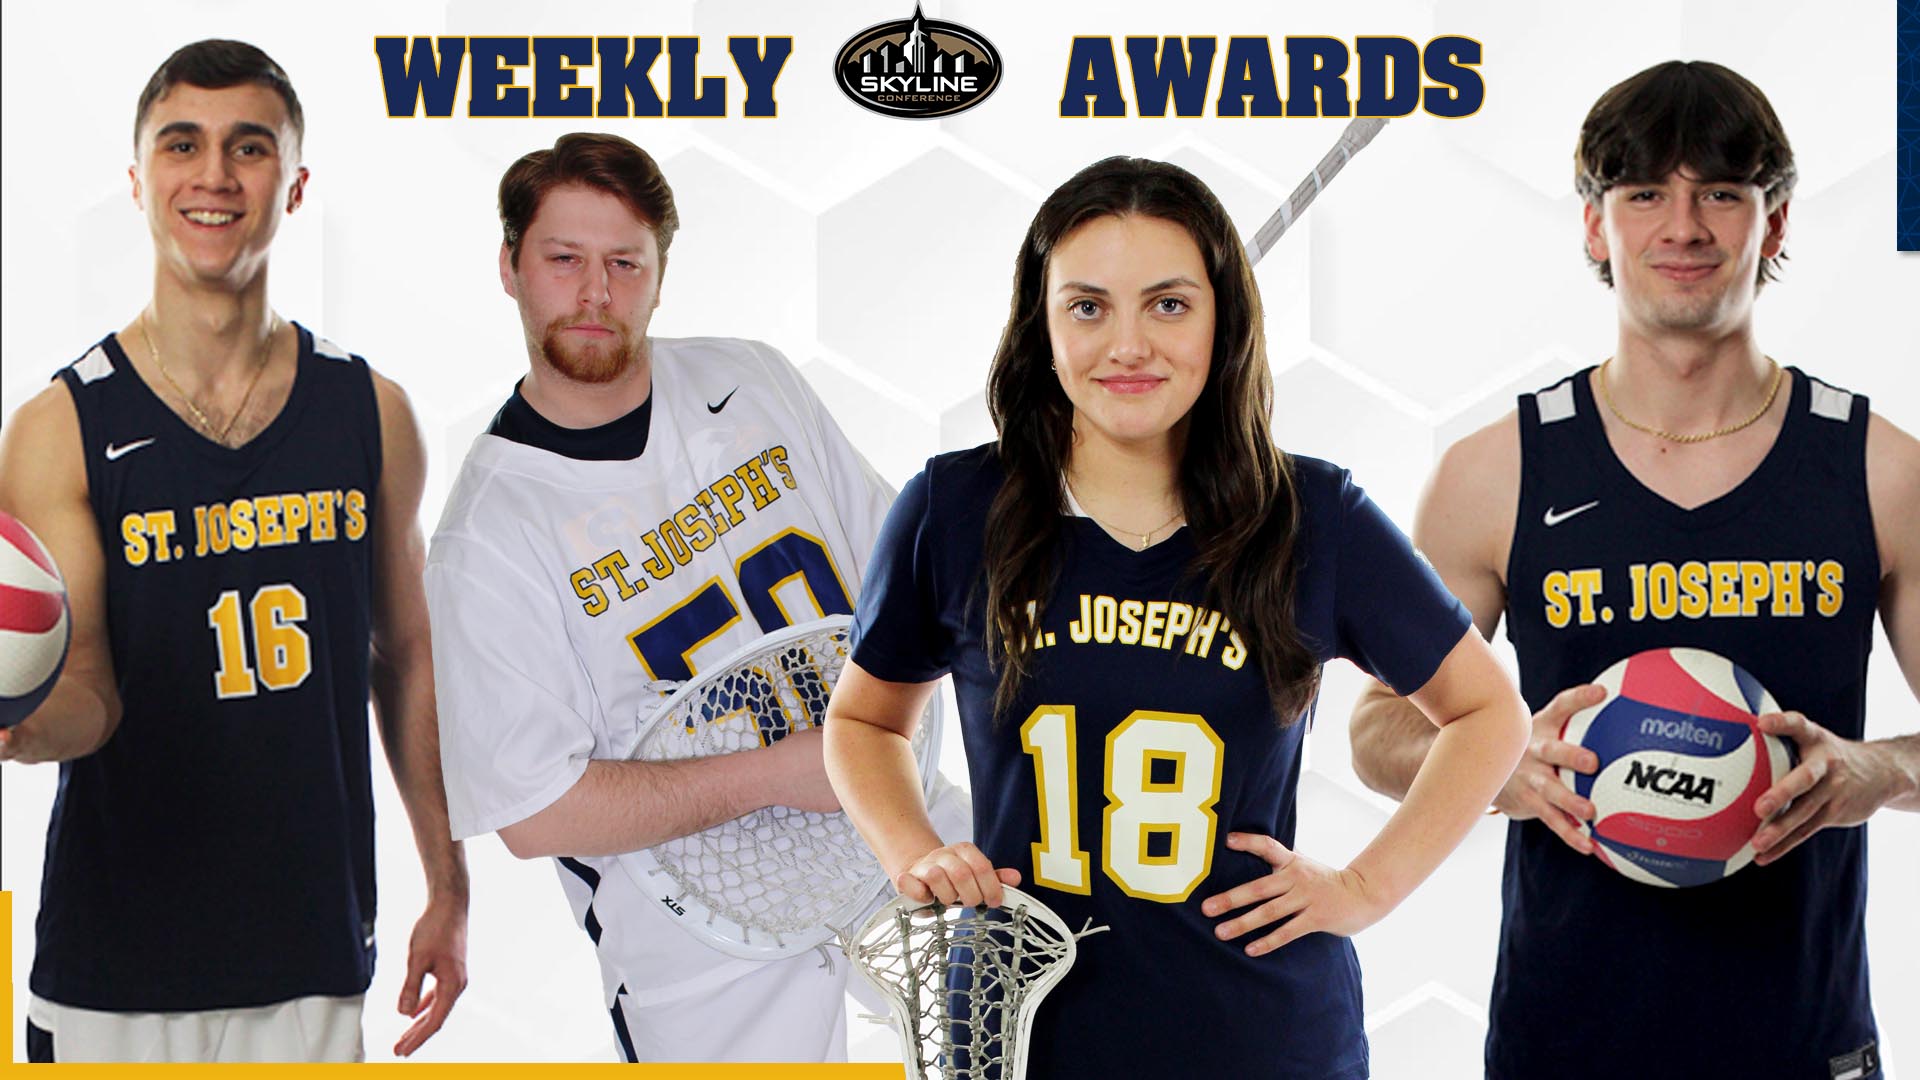 10 Golden Eagles Collect Skyline Weekly Awards